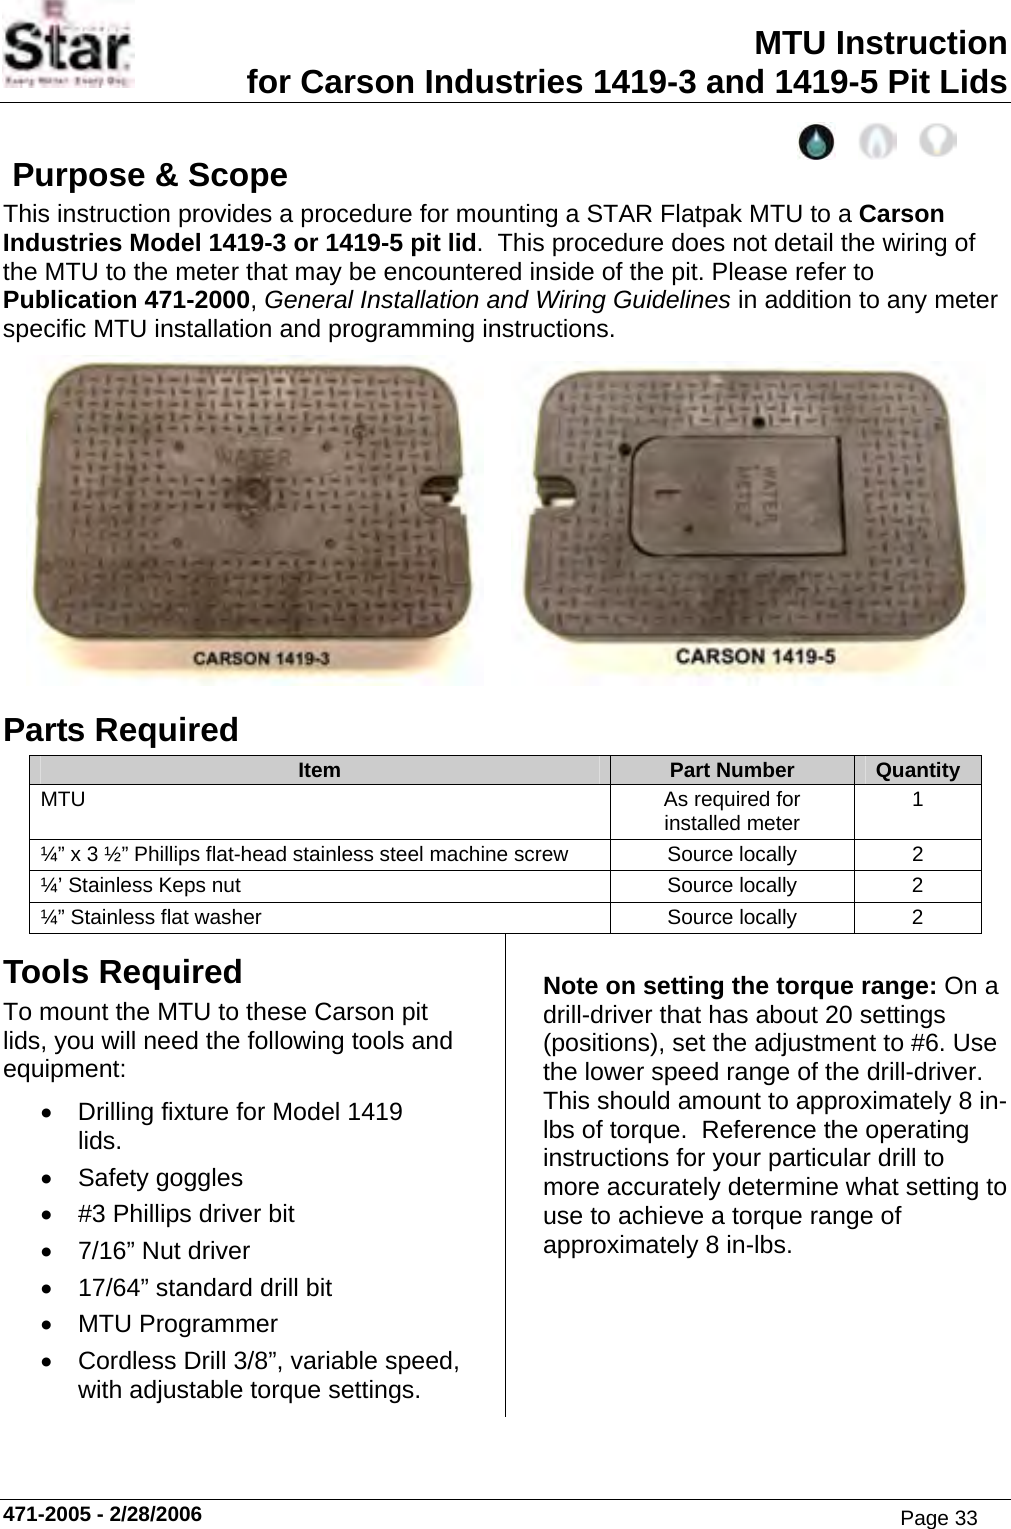 MTU Instruction for Carson Industries 1419-3 and 1419-5 Pit Lids  Purpose &amp; Scope This instruction provides a procedure for mounting a STAR Flatpak MTU to a Carson Industries Model 1419-3 or 1419-5 pit lid.  This procedure does not detail the wiring of the MTU to the meter that may be encountered inside of the pit. Please refer to Publication 471-2000, General Installation and Wiring Guidelines in addition to any meter specific MTU installation and programming instructions.       Parts Required Item  Part Number  Quantity MTU  As required for installed meter  1 ¼” x 3 ½” Phillips flat-head stainless steel machine screw  Source locally  2 ¼’ Stainless Keps nut  Source locally  2 ¼” Stainless flat washer  Source locally  2 Tools Required To mount the MTU to these Carson pit lids, you will need the following tools and equipment: •  Drilling fixture for Model 1419 lids. • Safety goggles •  #3 Phillips driver bit •  7/16” Nut driver •  17/64” standard drill bit • MTU Programmer •  Cordless Drill 3/8”, variable speed, with adjustable torque settings. Note on setting the torque range: On a drill-driver that has about 20 settings (positions), set the adjustment to #6. Use the lower speed range of the drill-driver. This should amount to approximately 8 in-lbs of torque.  Reference the operating instructions for your particular drill to more accurately determine what setting to use to achieve a torque range of approximately 8 in-lbs. 471-2005 - 2/28/2006 Page 33